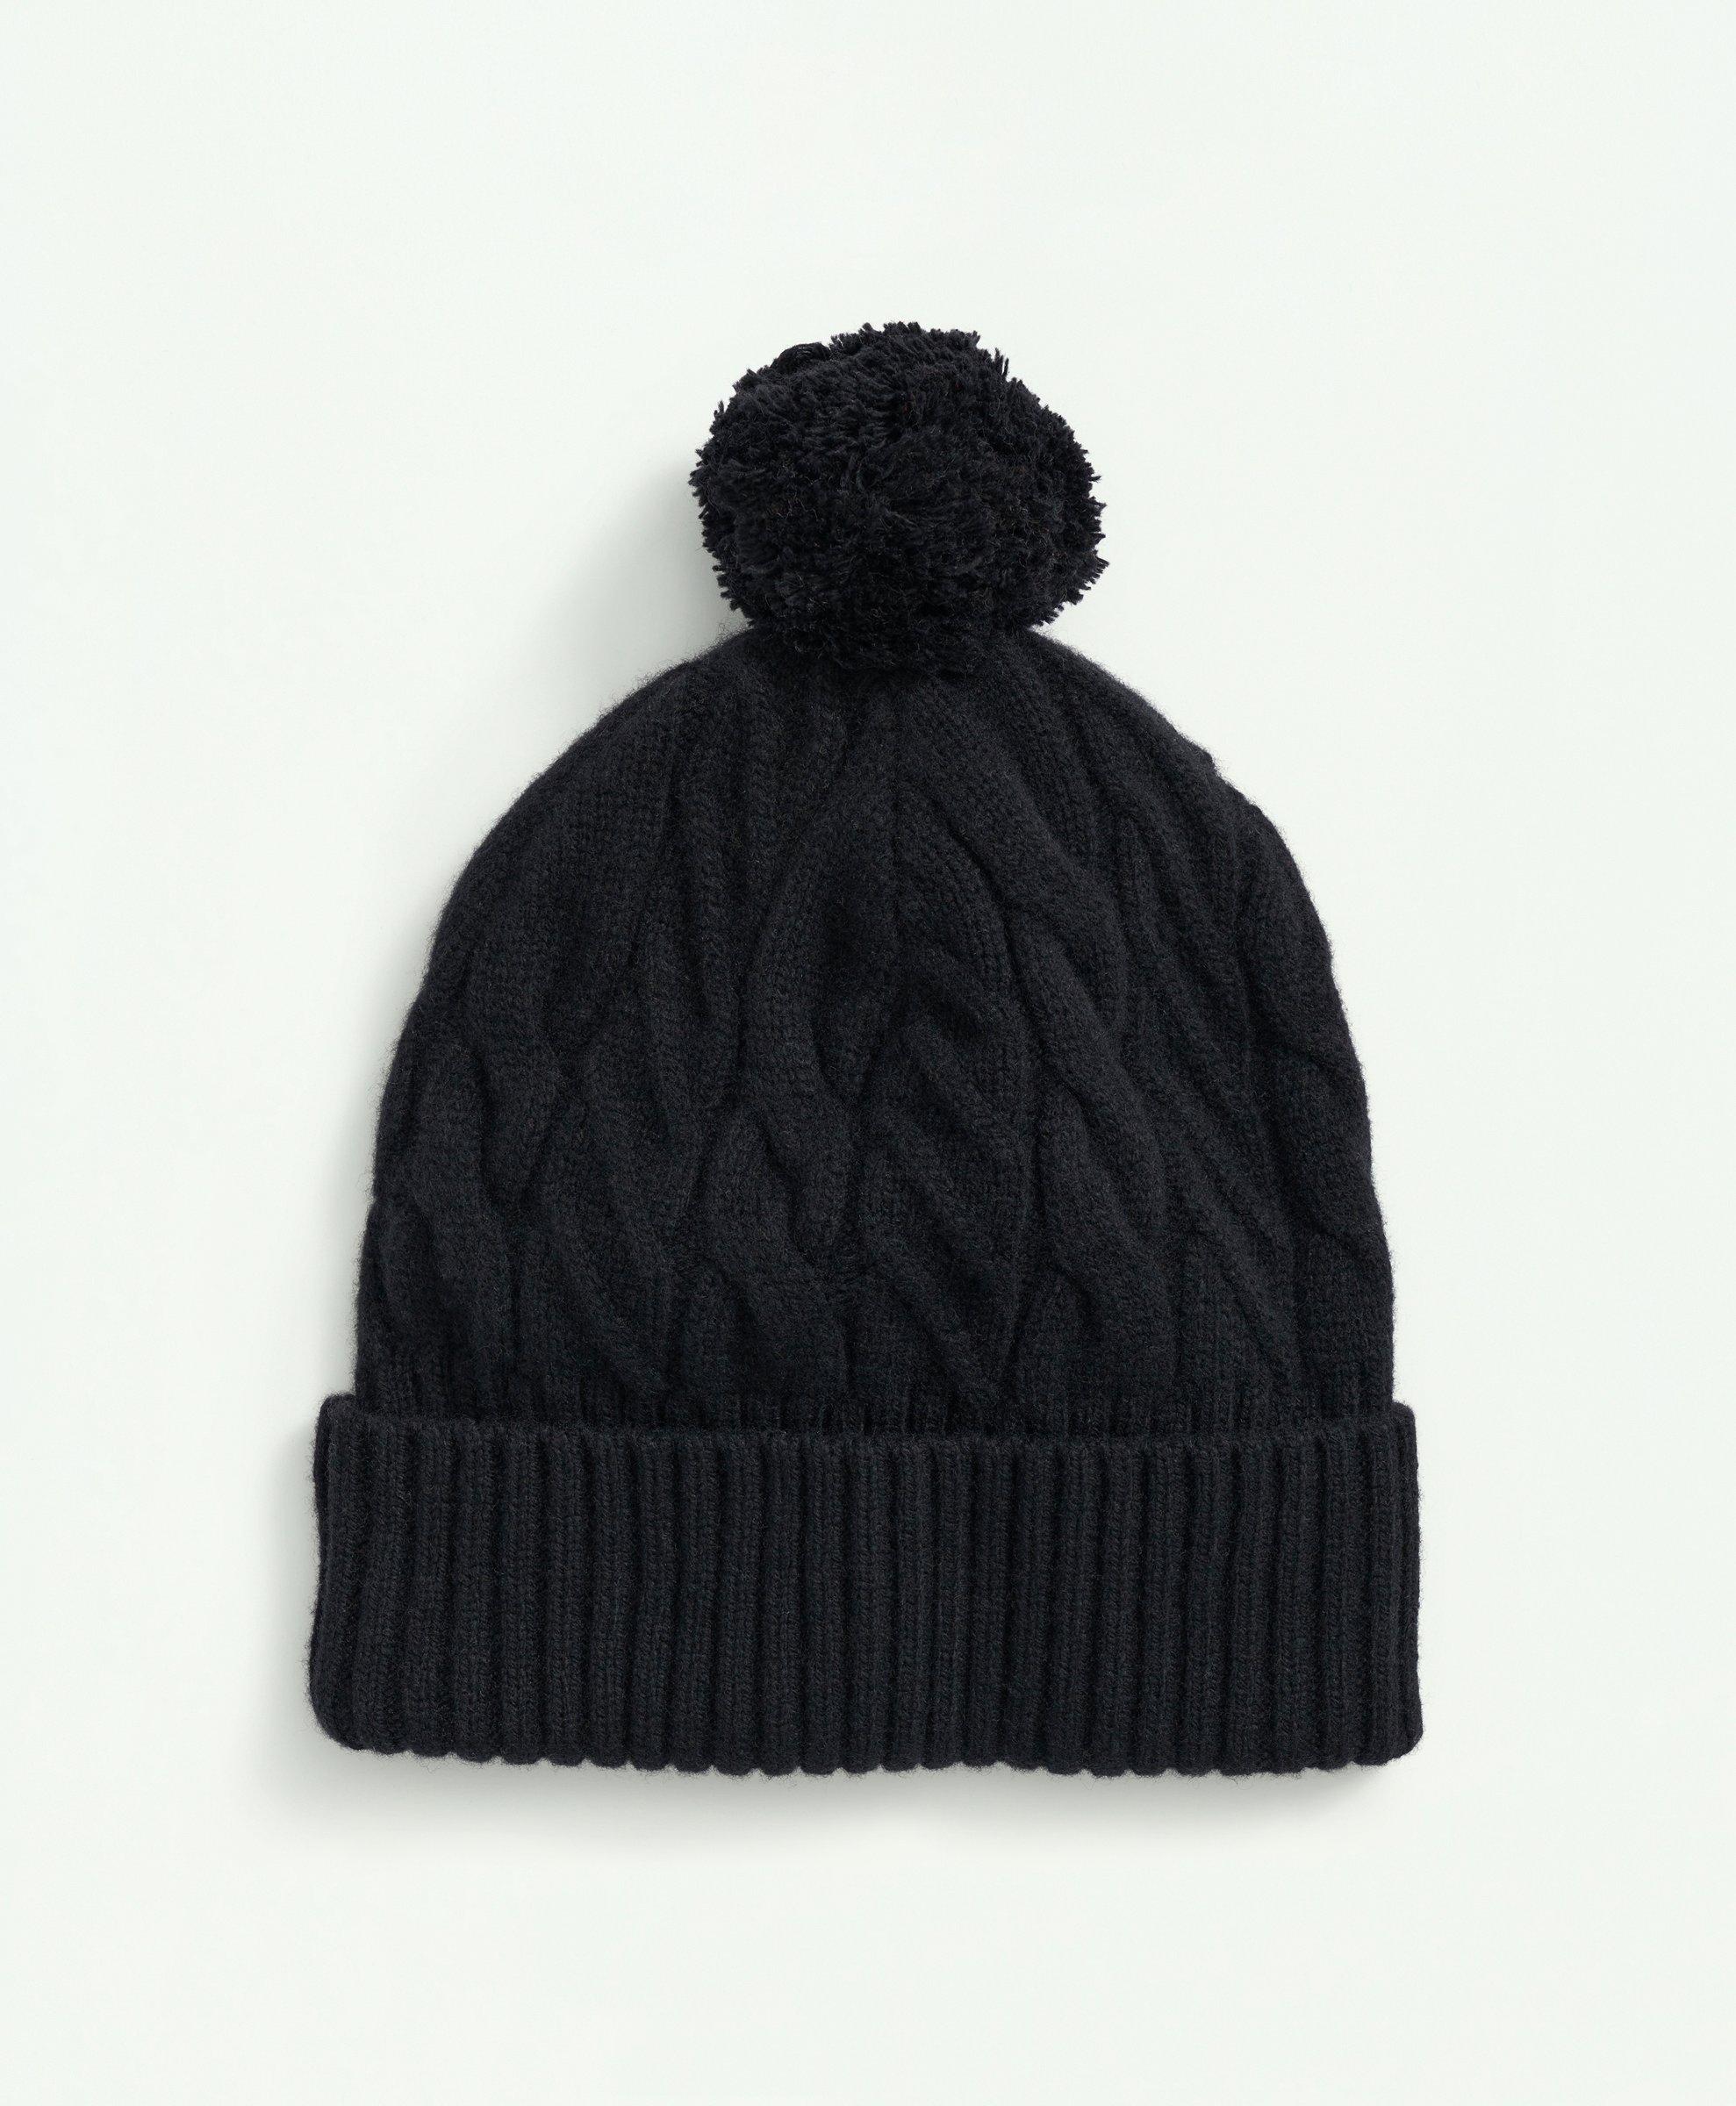 Pom Merino Blend Wool and Cashmere Beanie Knit Cable